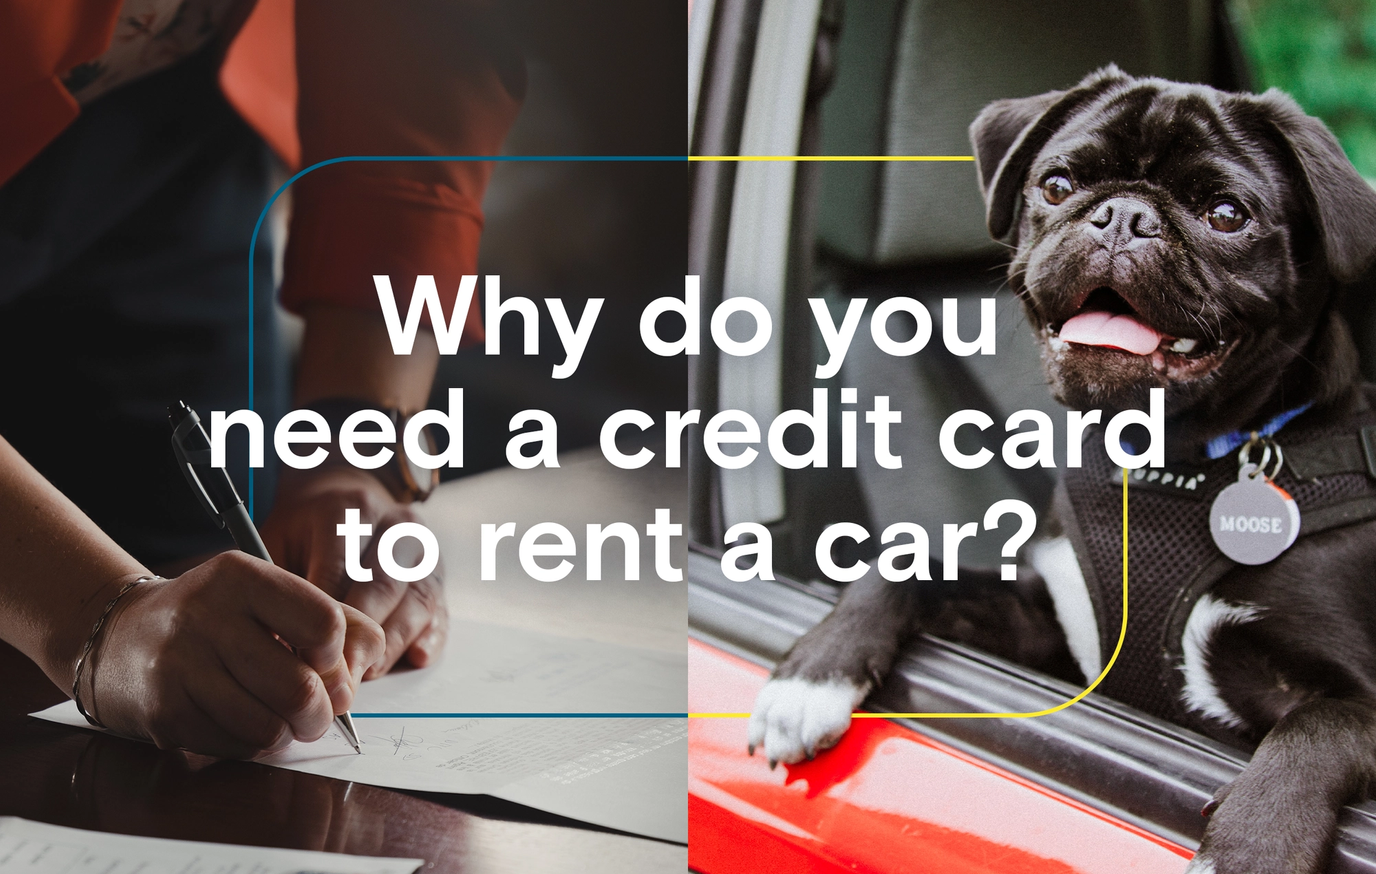 Why do you need a credit card to rent a car?